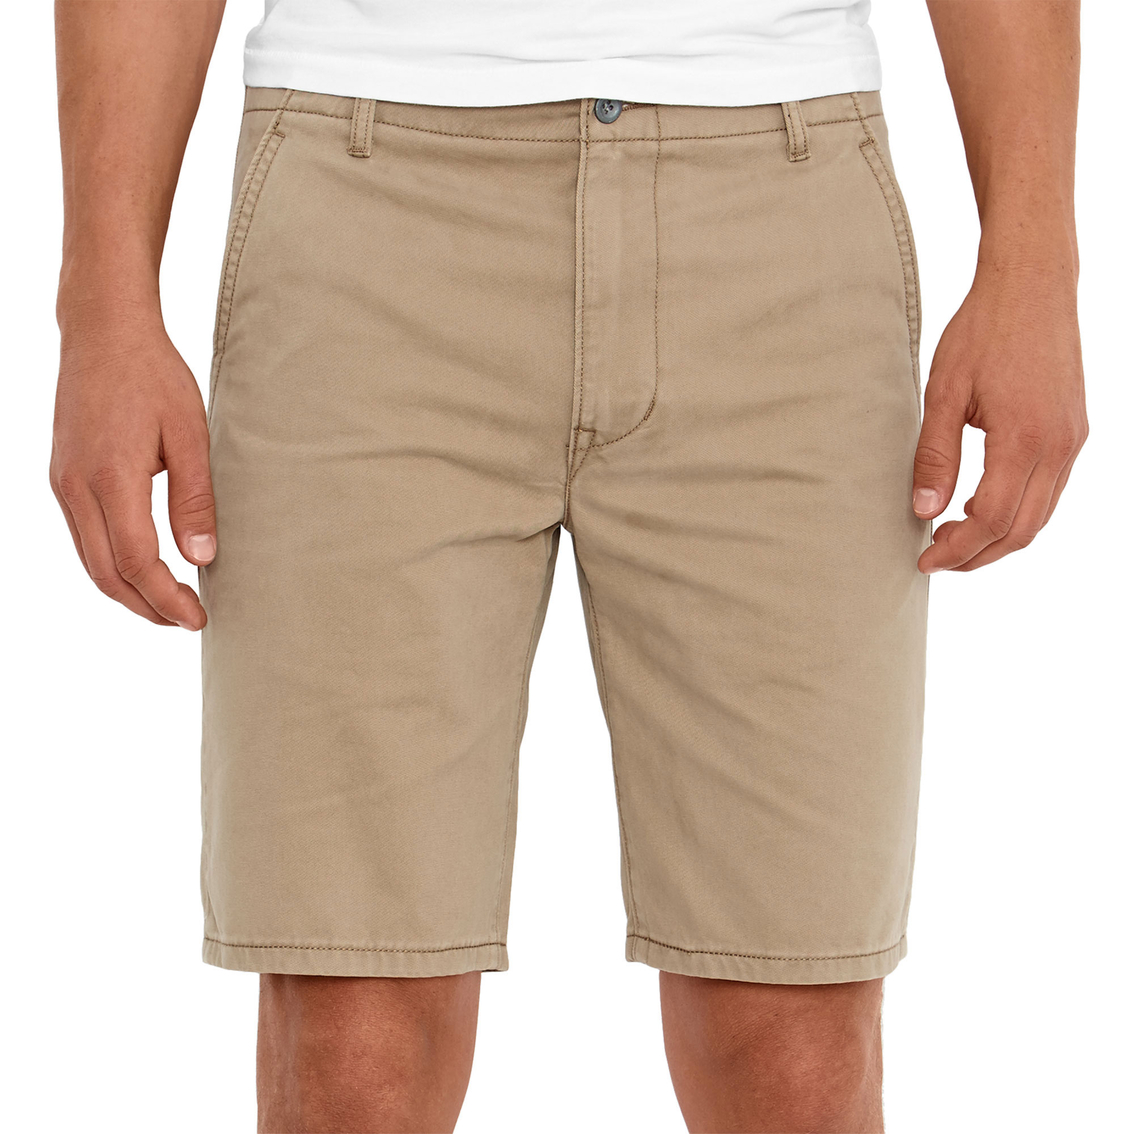 Levi's Chino Shorts | Shorts | Clothing & Accessories | Shop The Exchange